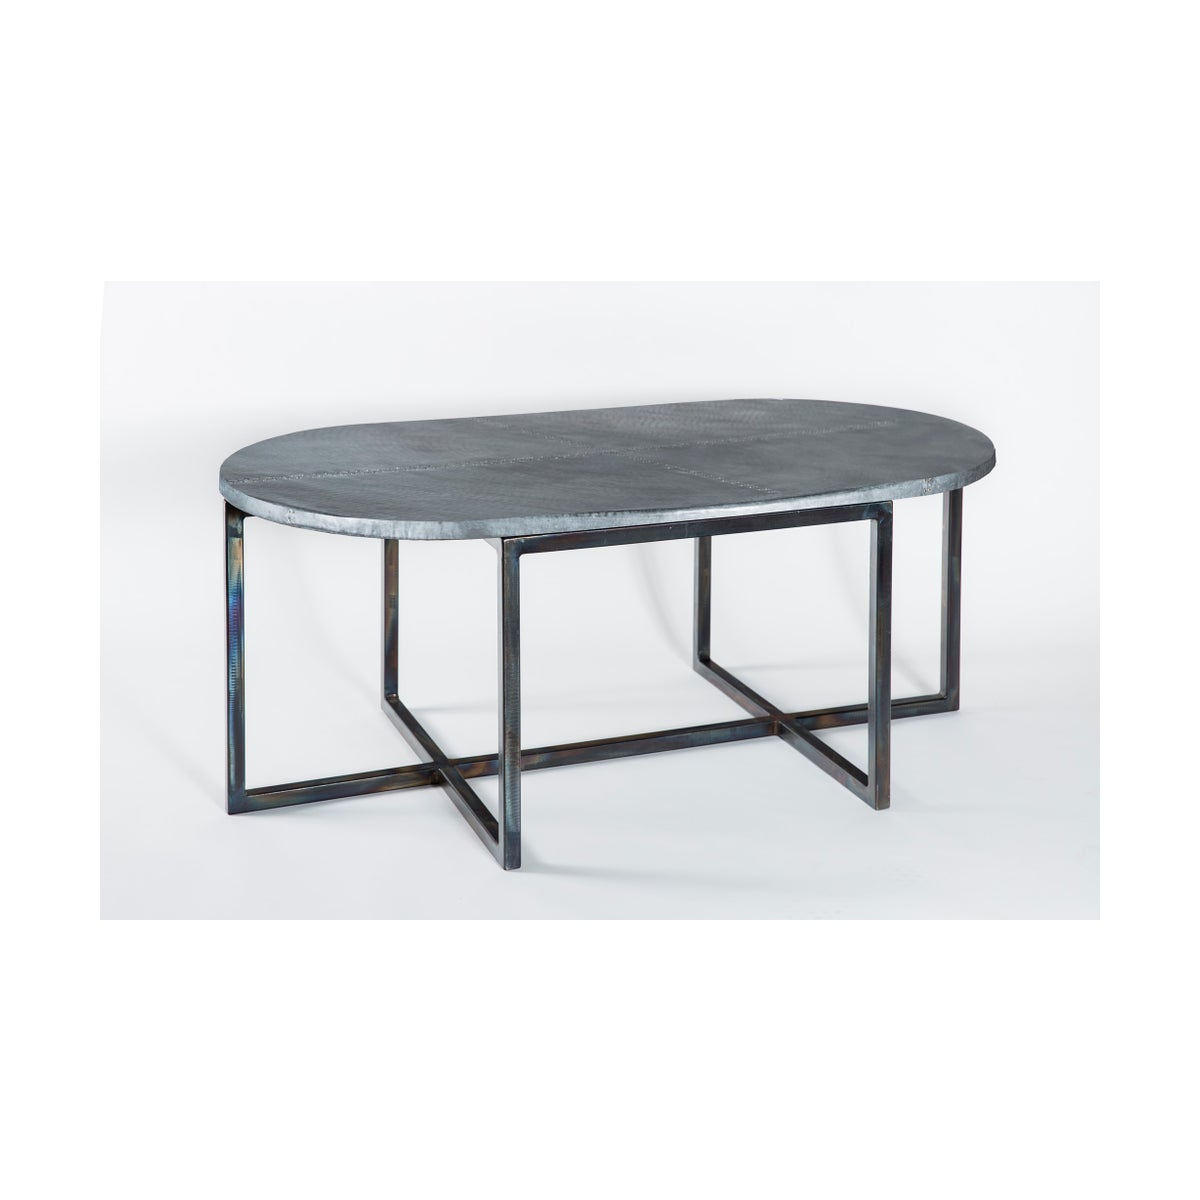 Foster Oval Cocktail Table with Acid Washed Oval Hammered Zinc Top